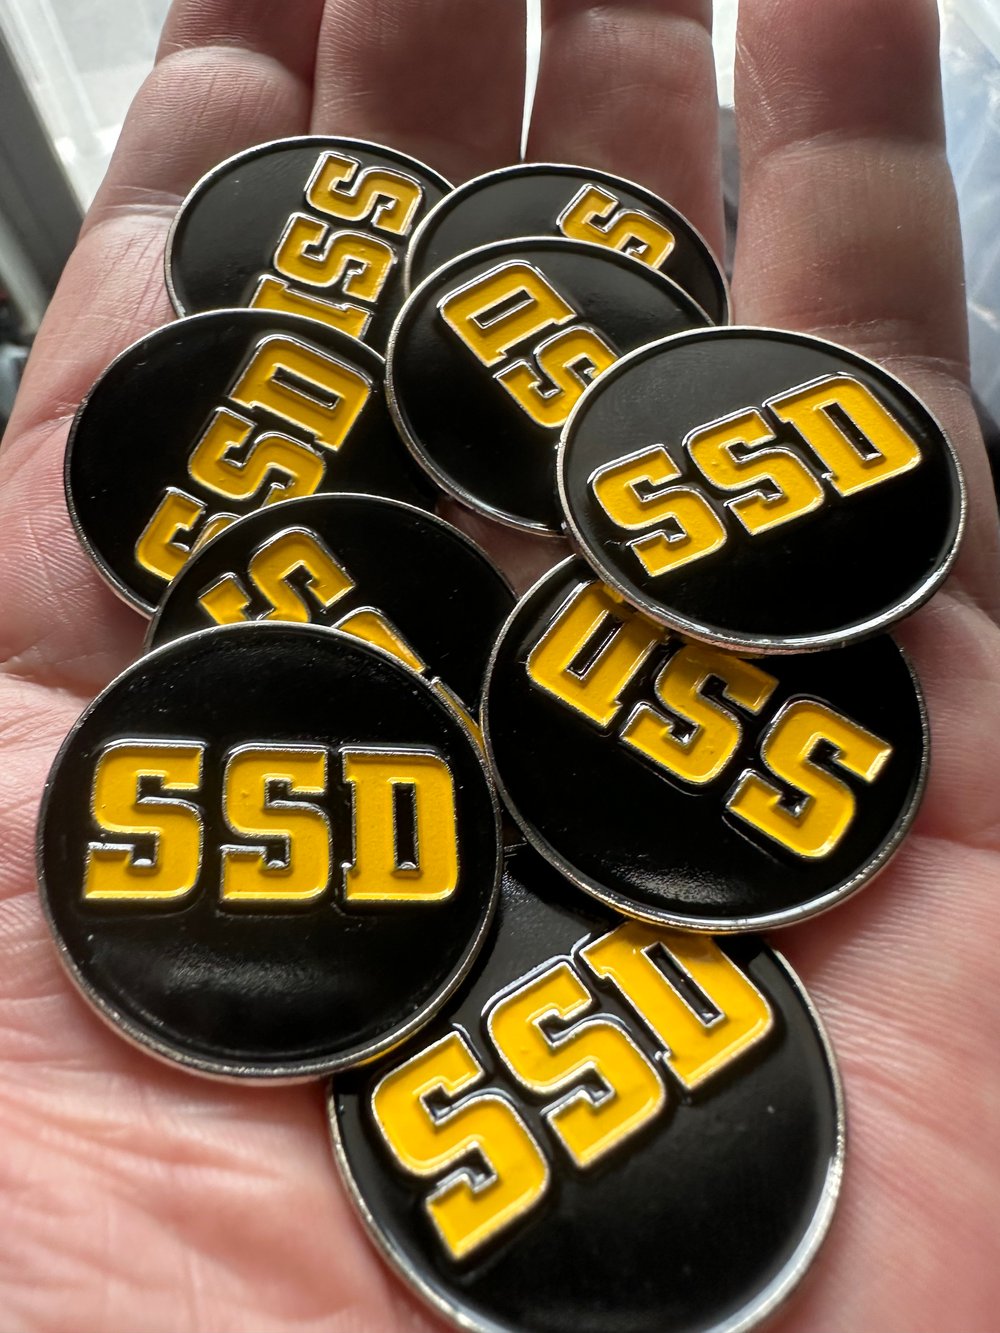 SSD Challenge Coin/Ball Marker